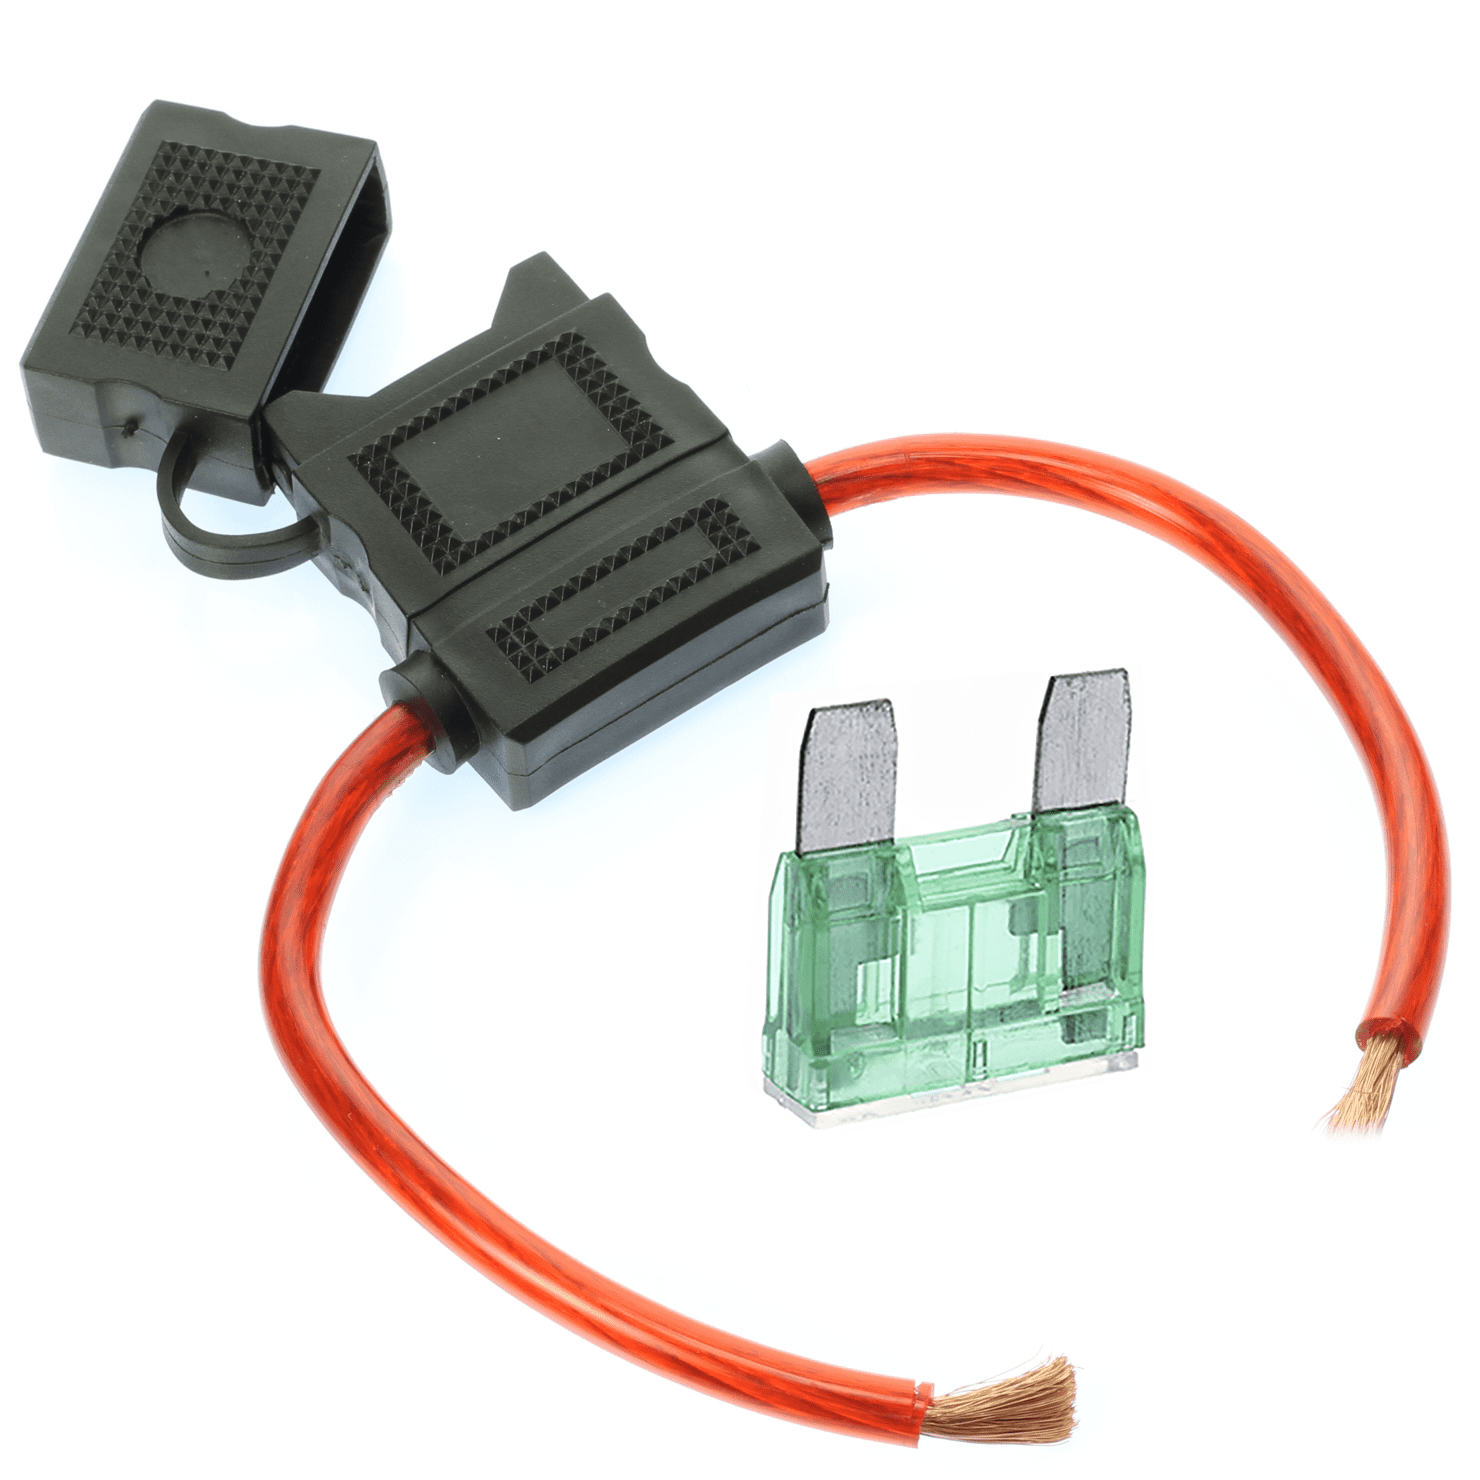 2Pack 10Gauge Inline ATC Fuse Holder+5AMP Fuse With Cover New Car Truck Install